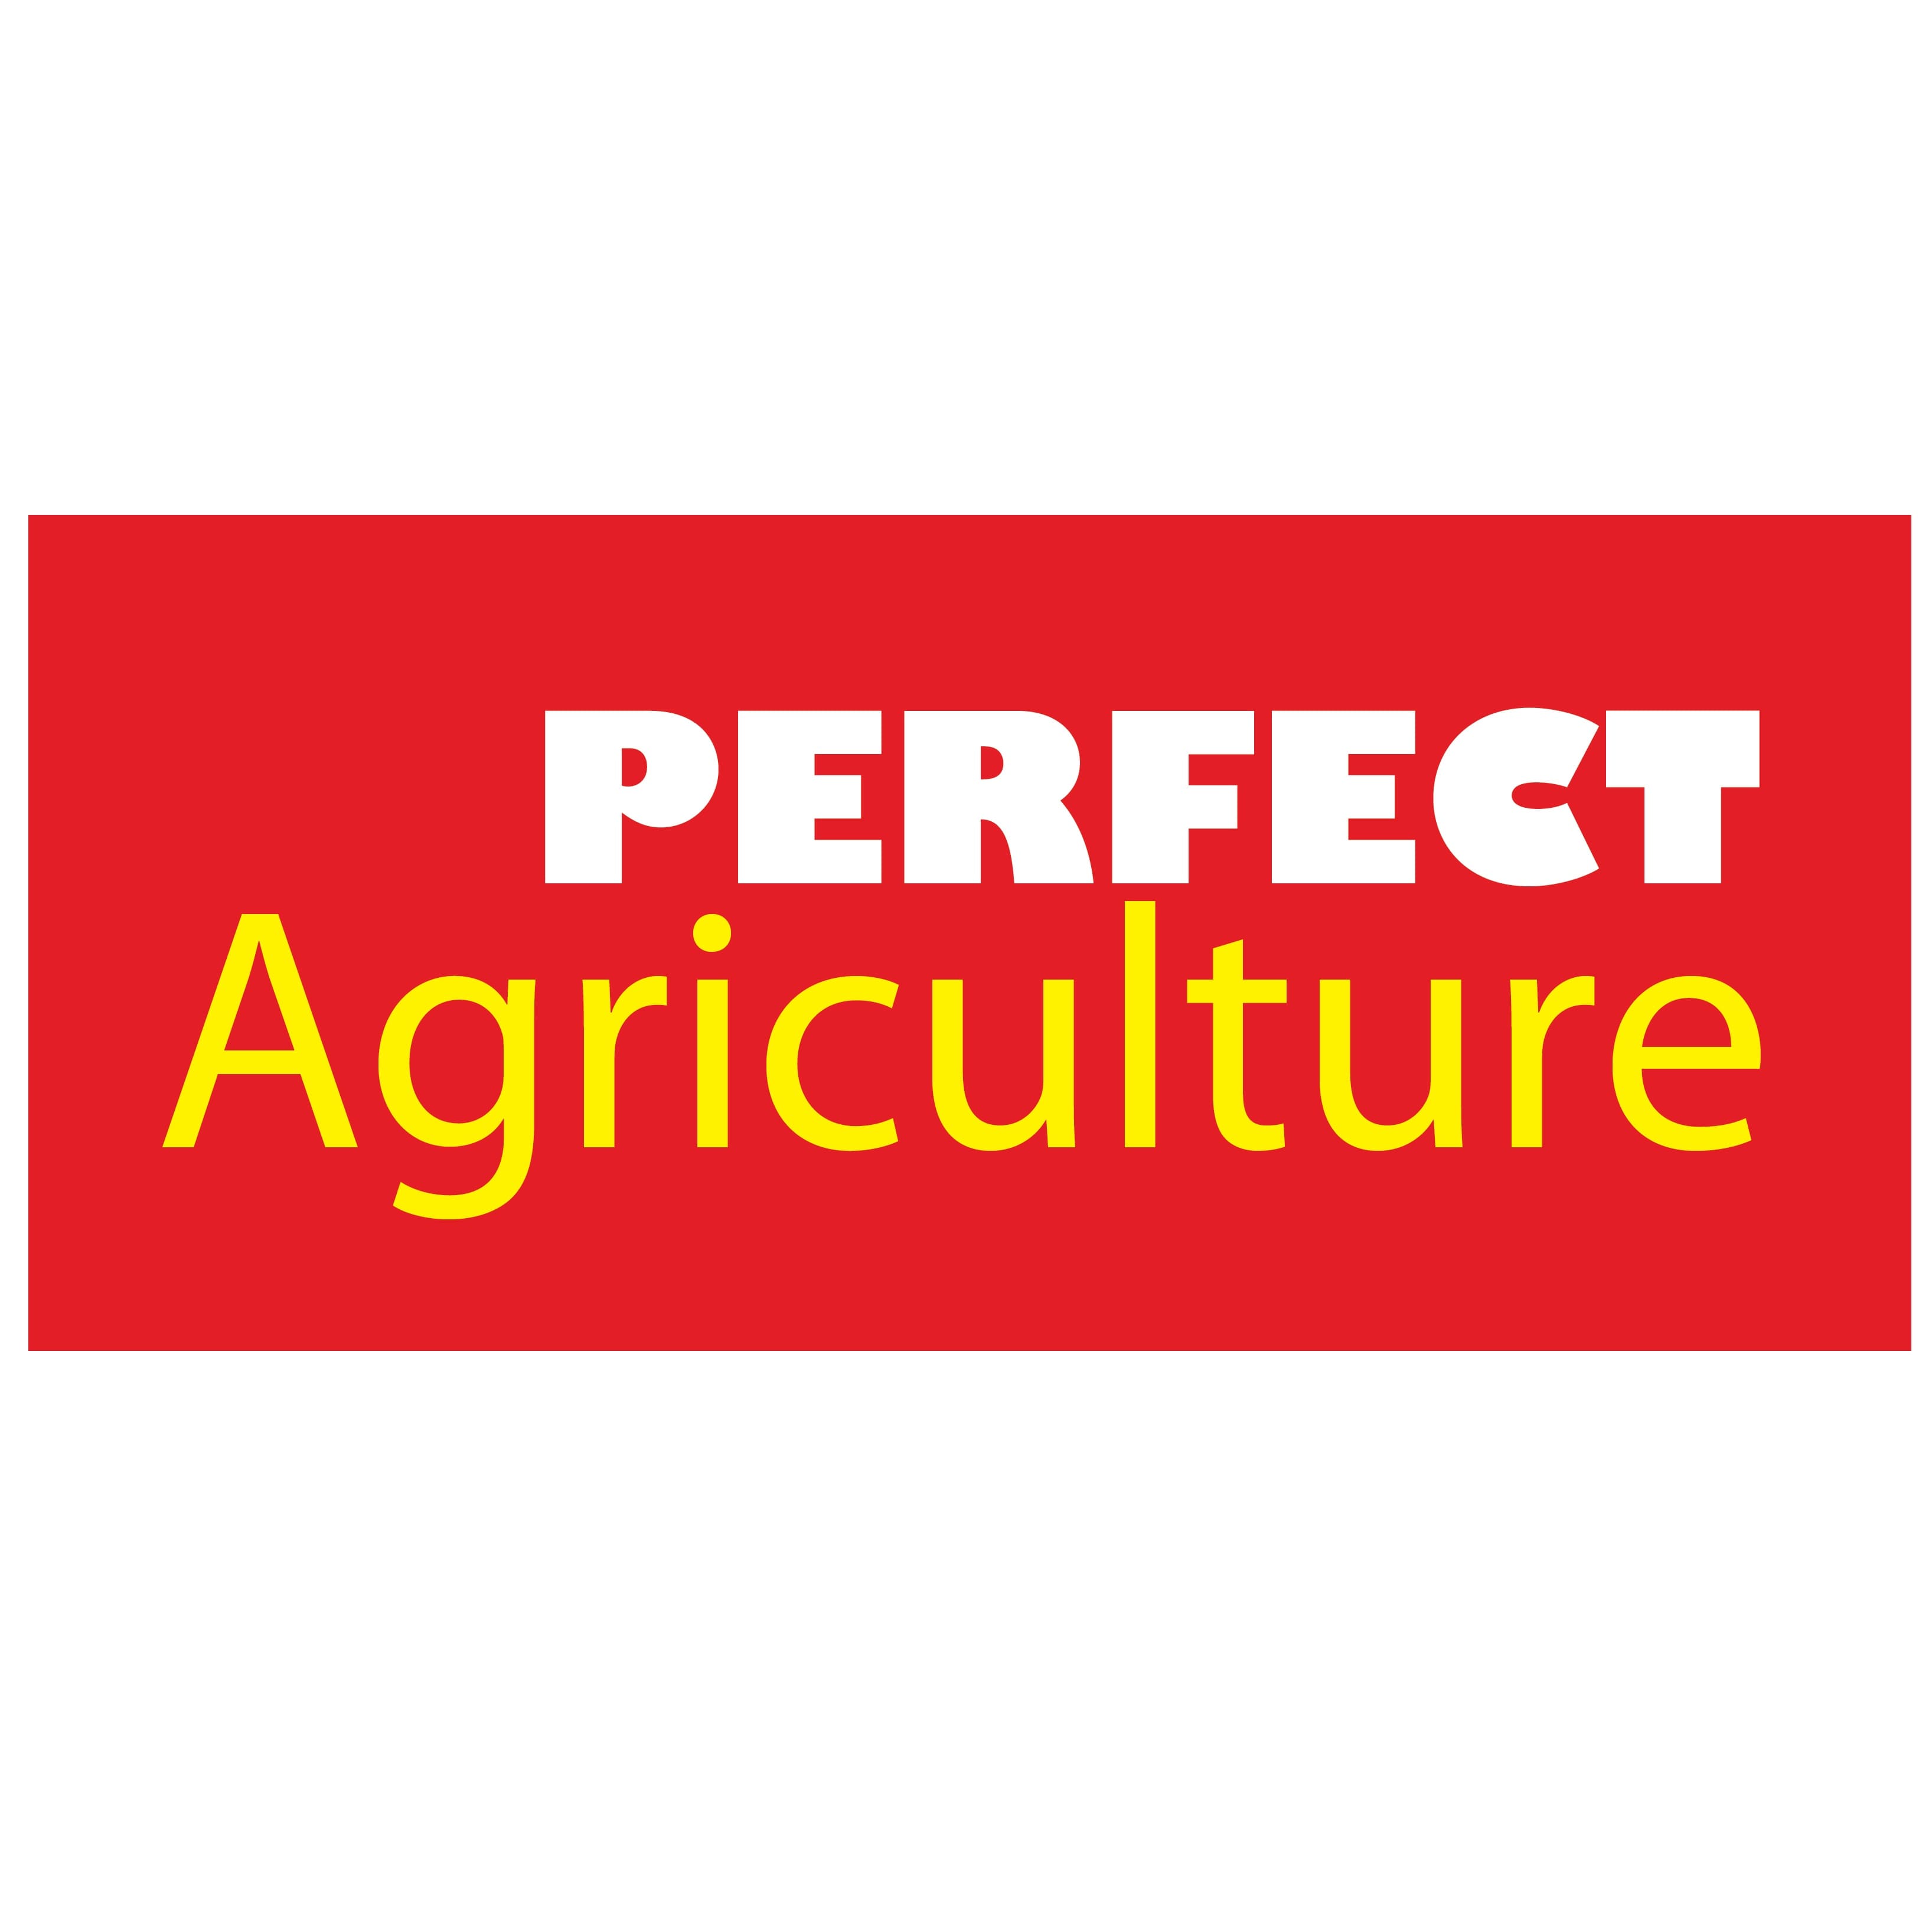 PERFECT AGRICULTURE